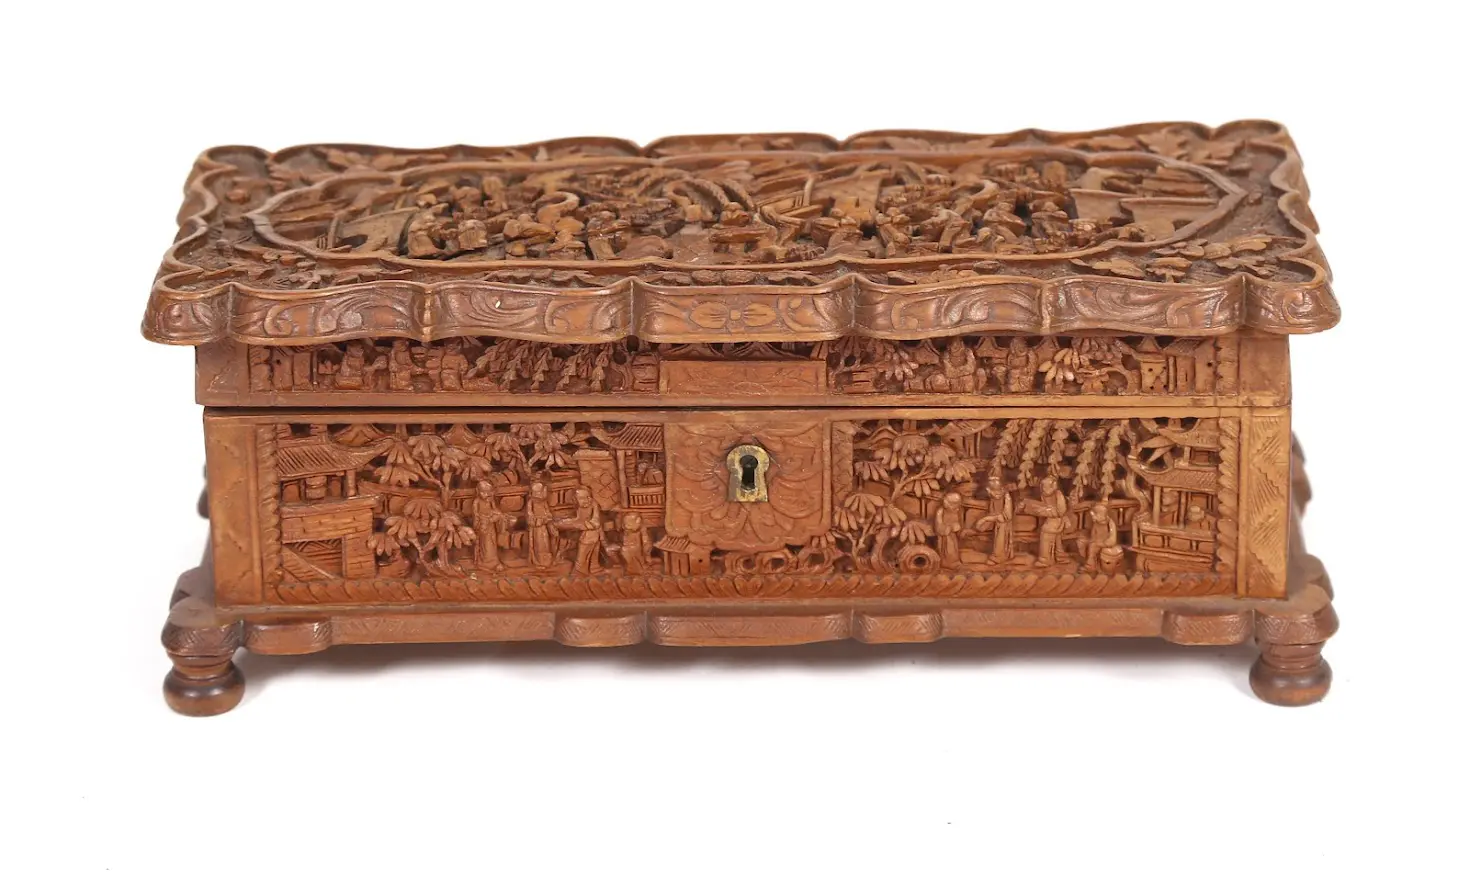 A wooden box with carvings on it.